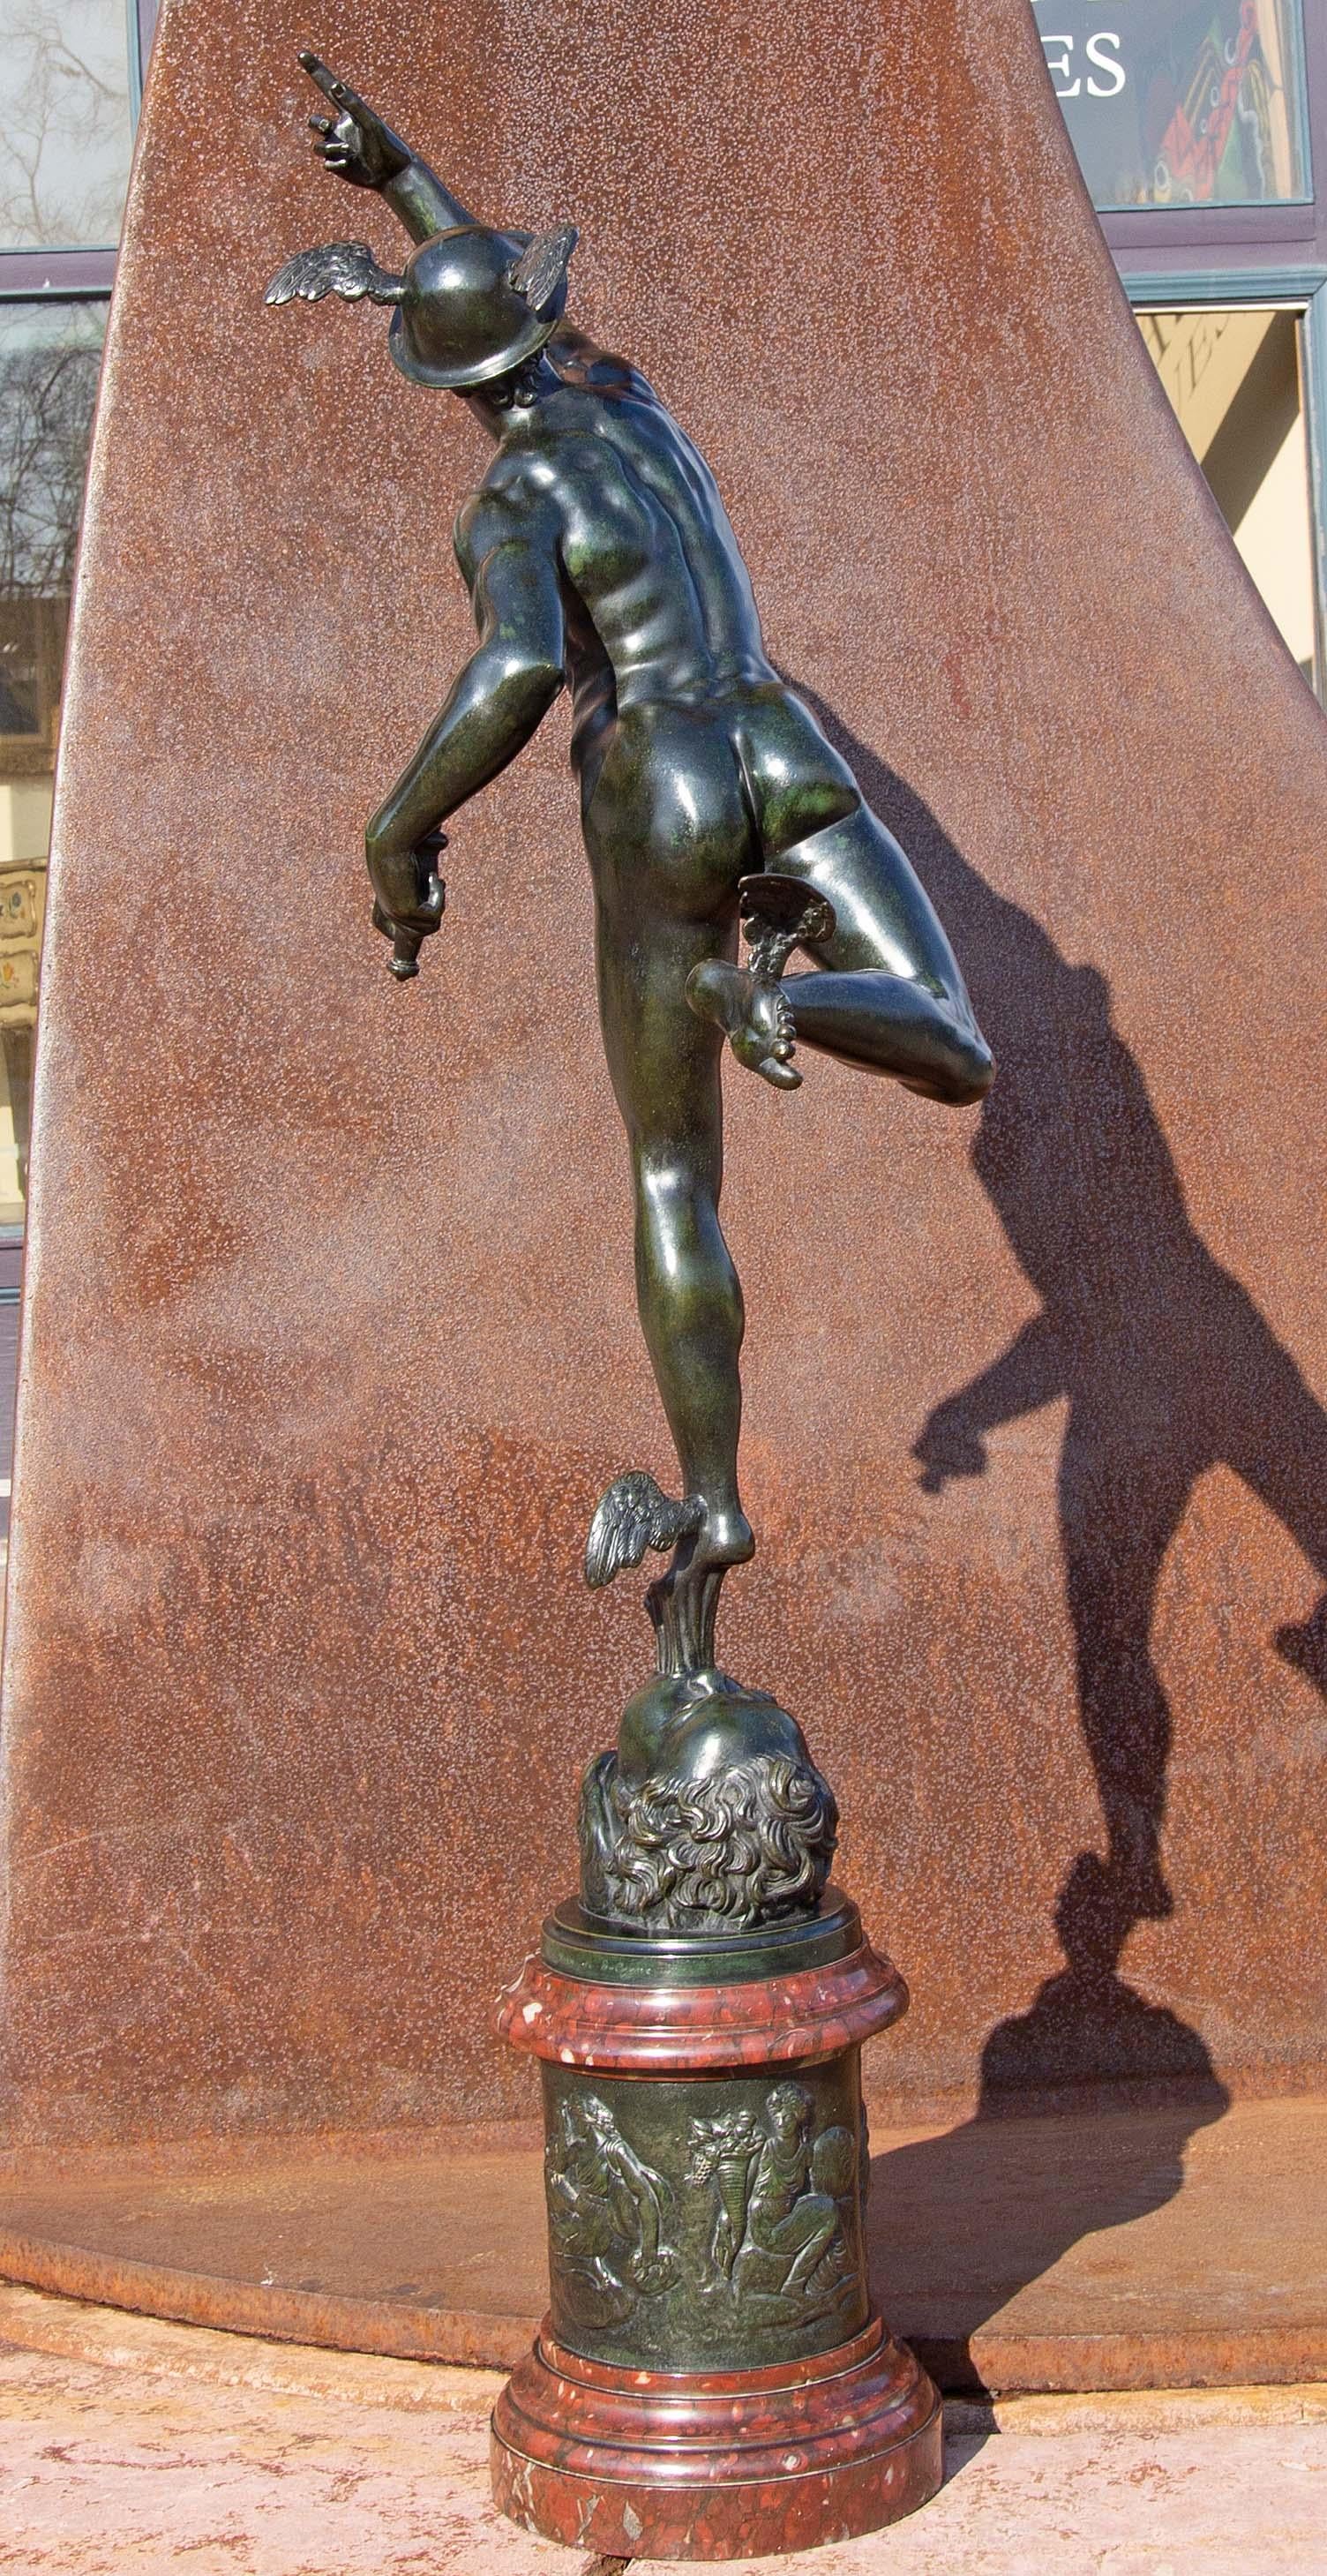 Fine Grand Tour bronze sculpture of mercury flying on the wind after Giambologna. Polished rouge marble and bronze attached base. Green marble pedestal. Inscribed Jean de Bologne ( Giambologna). Over all height 8'7